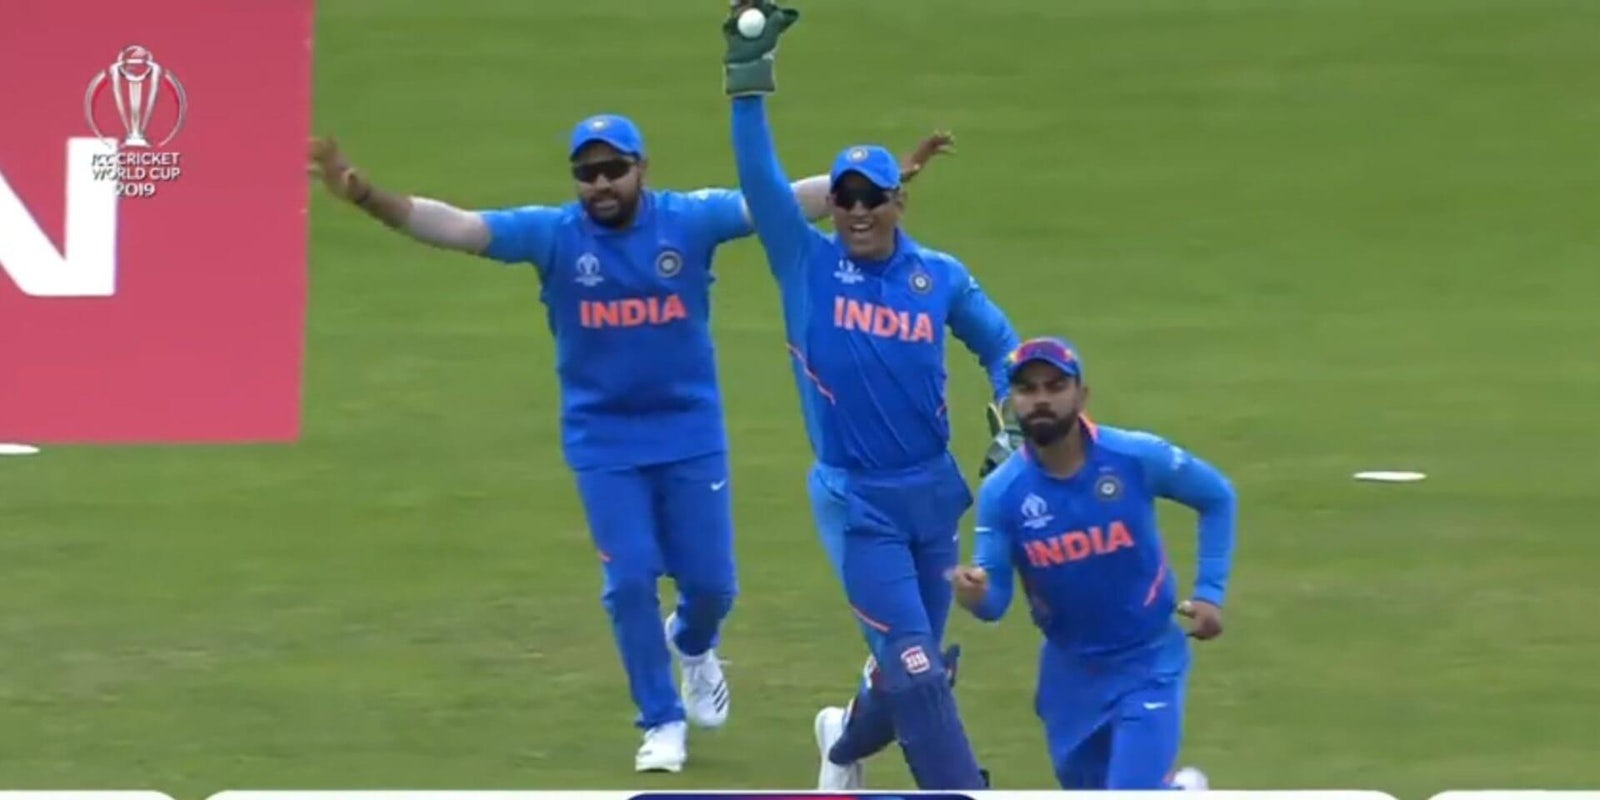 India vs South Africa cricket live stream